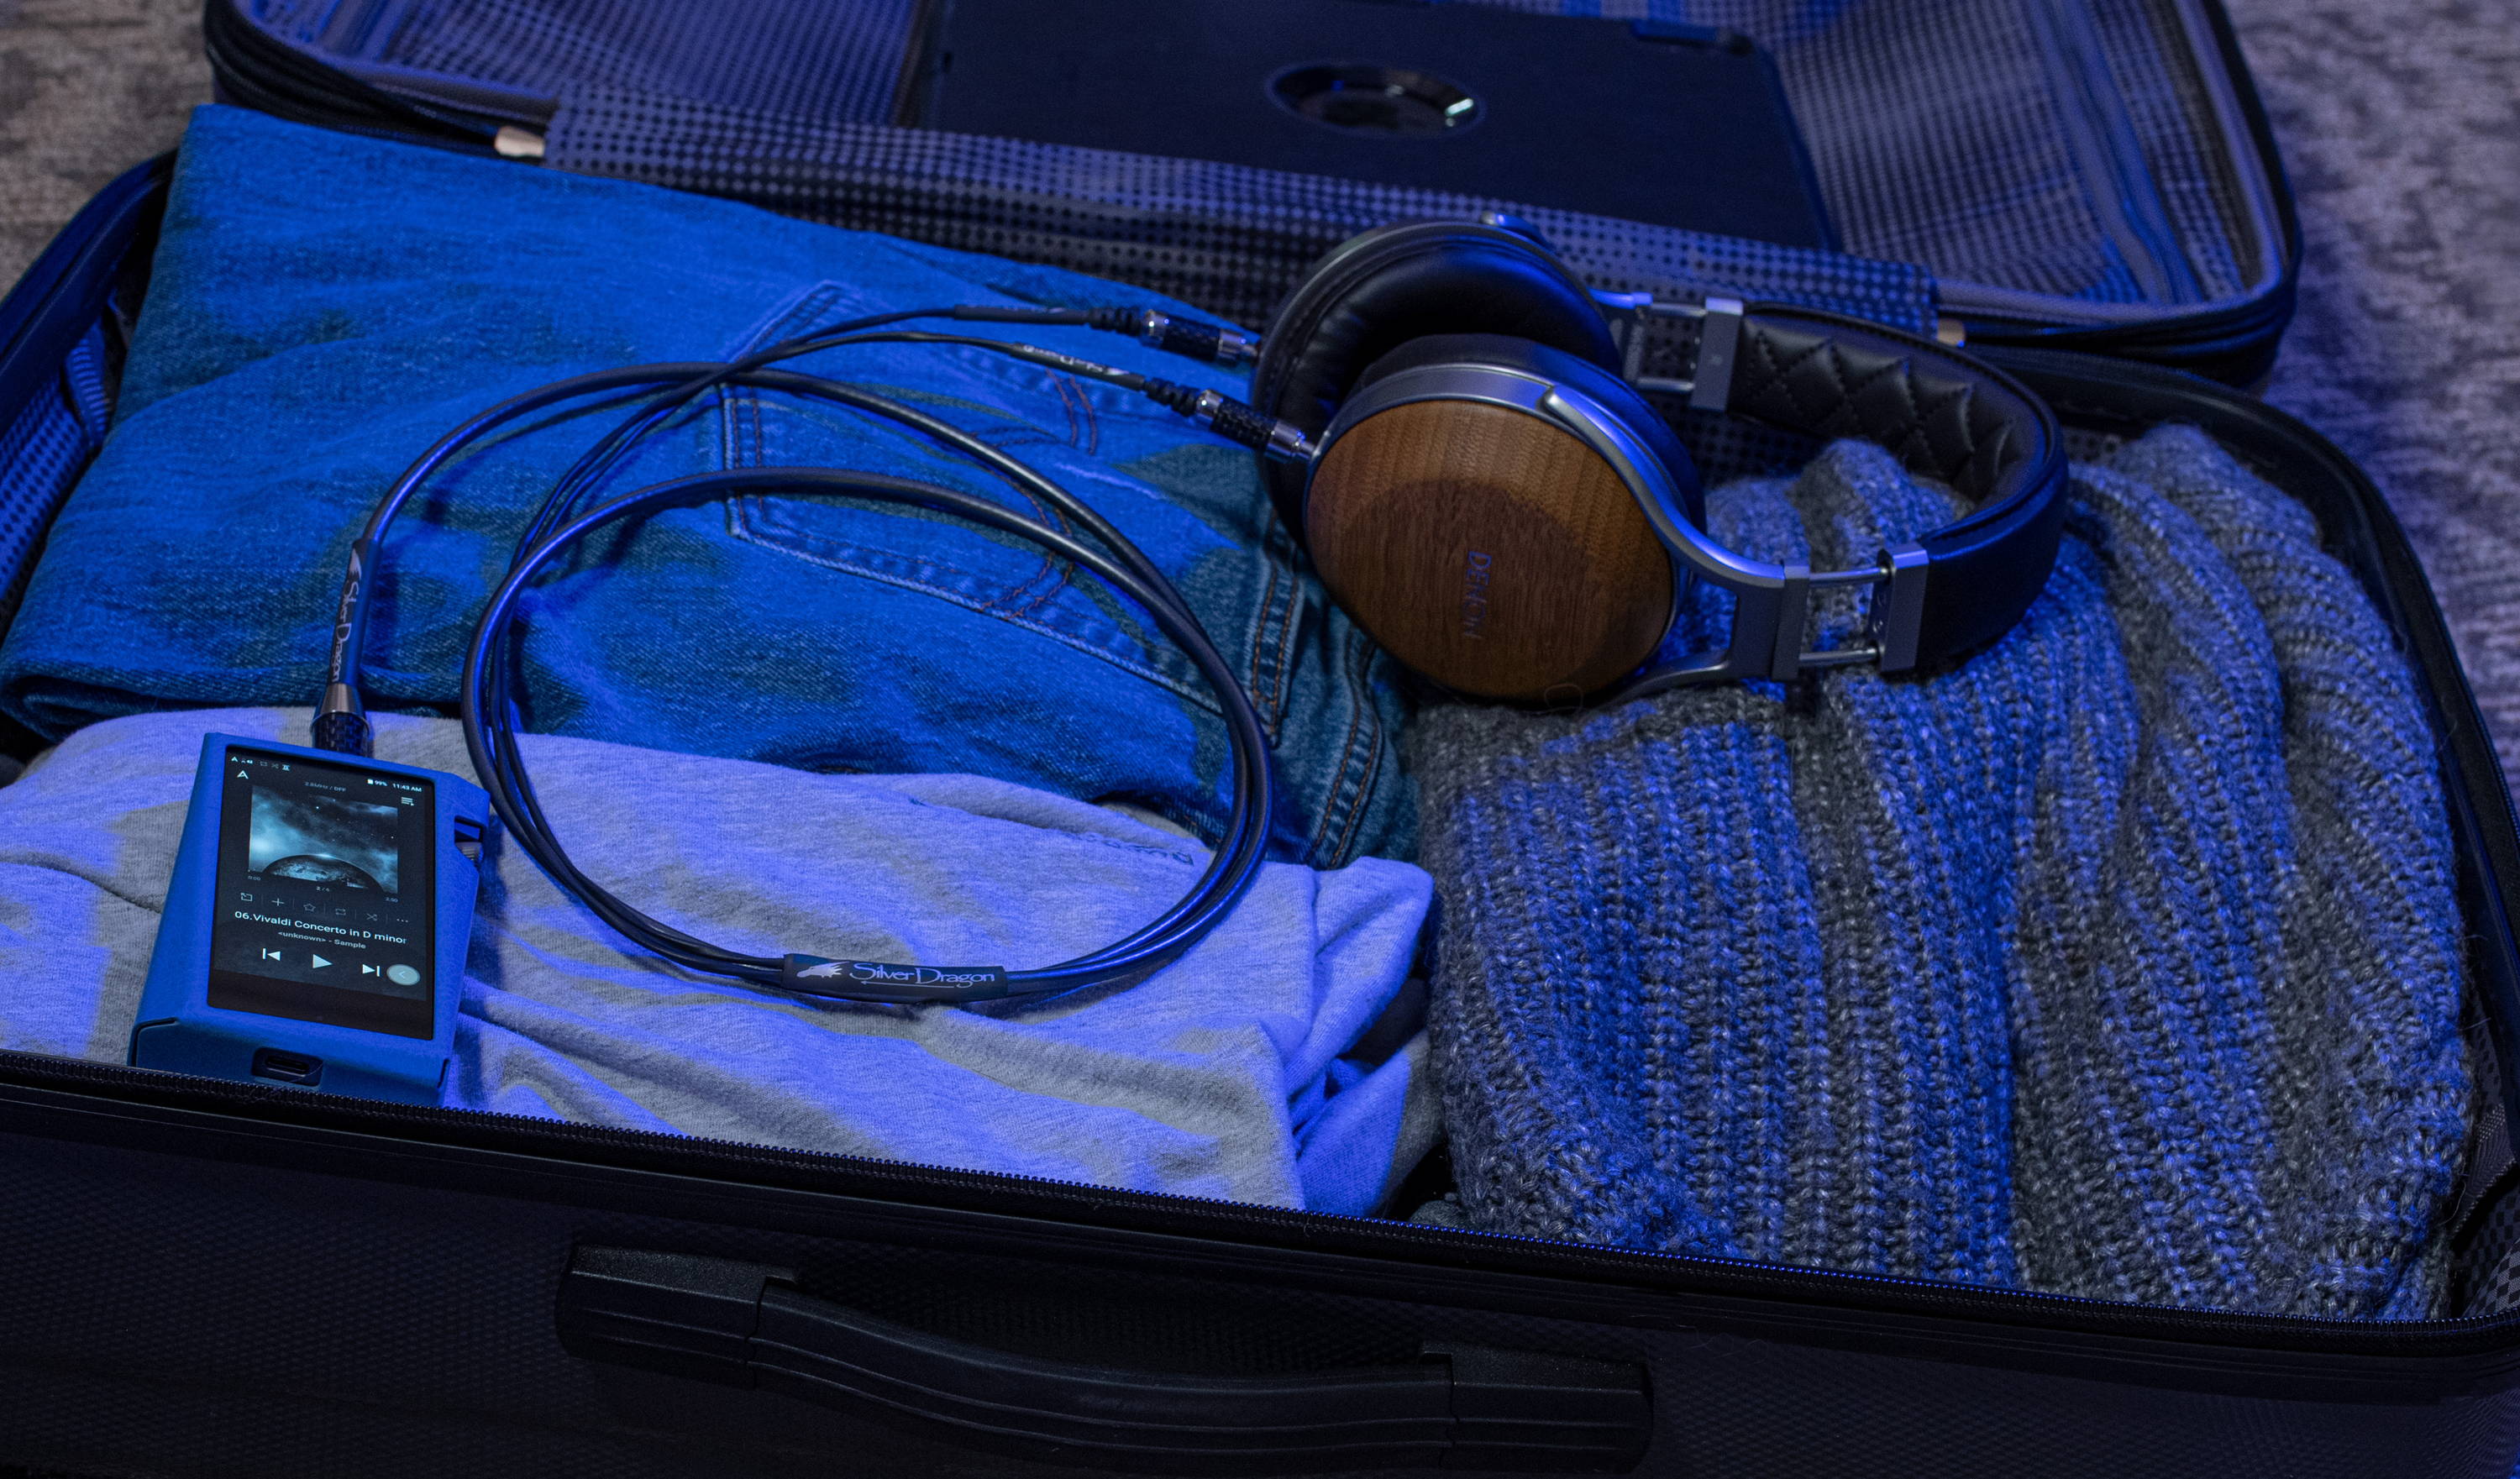 open suitcase with headphone and DAP